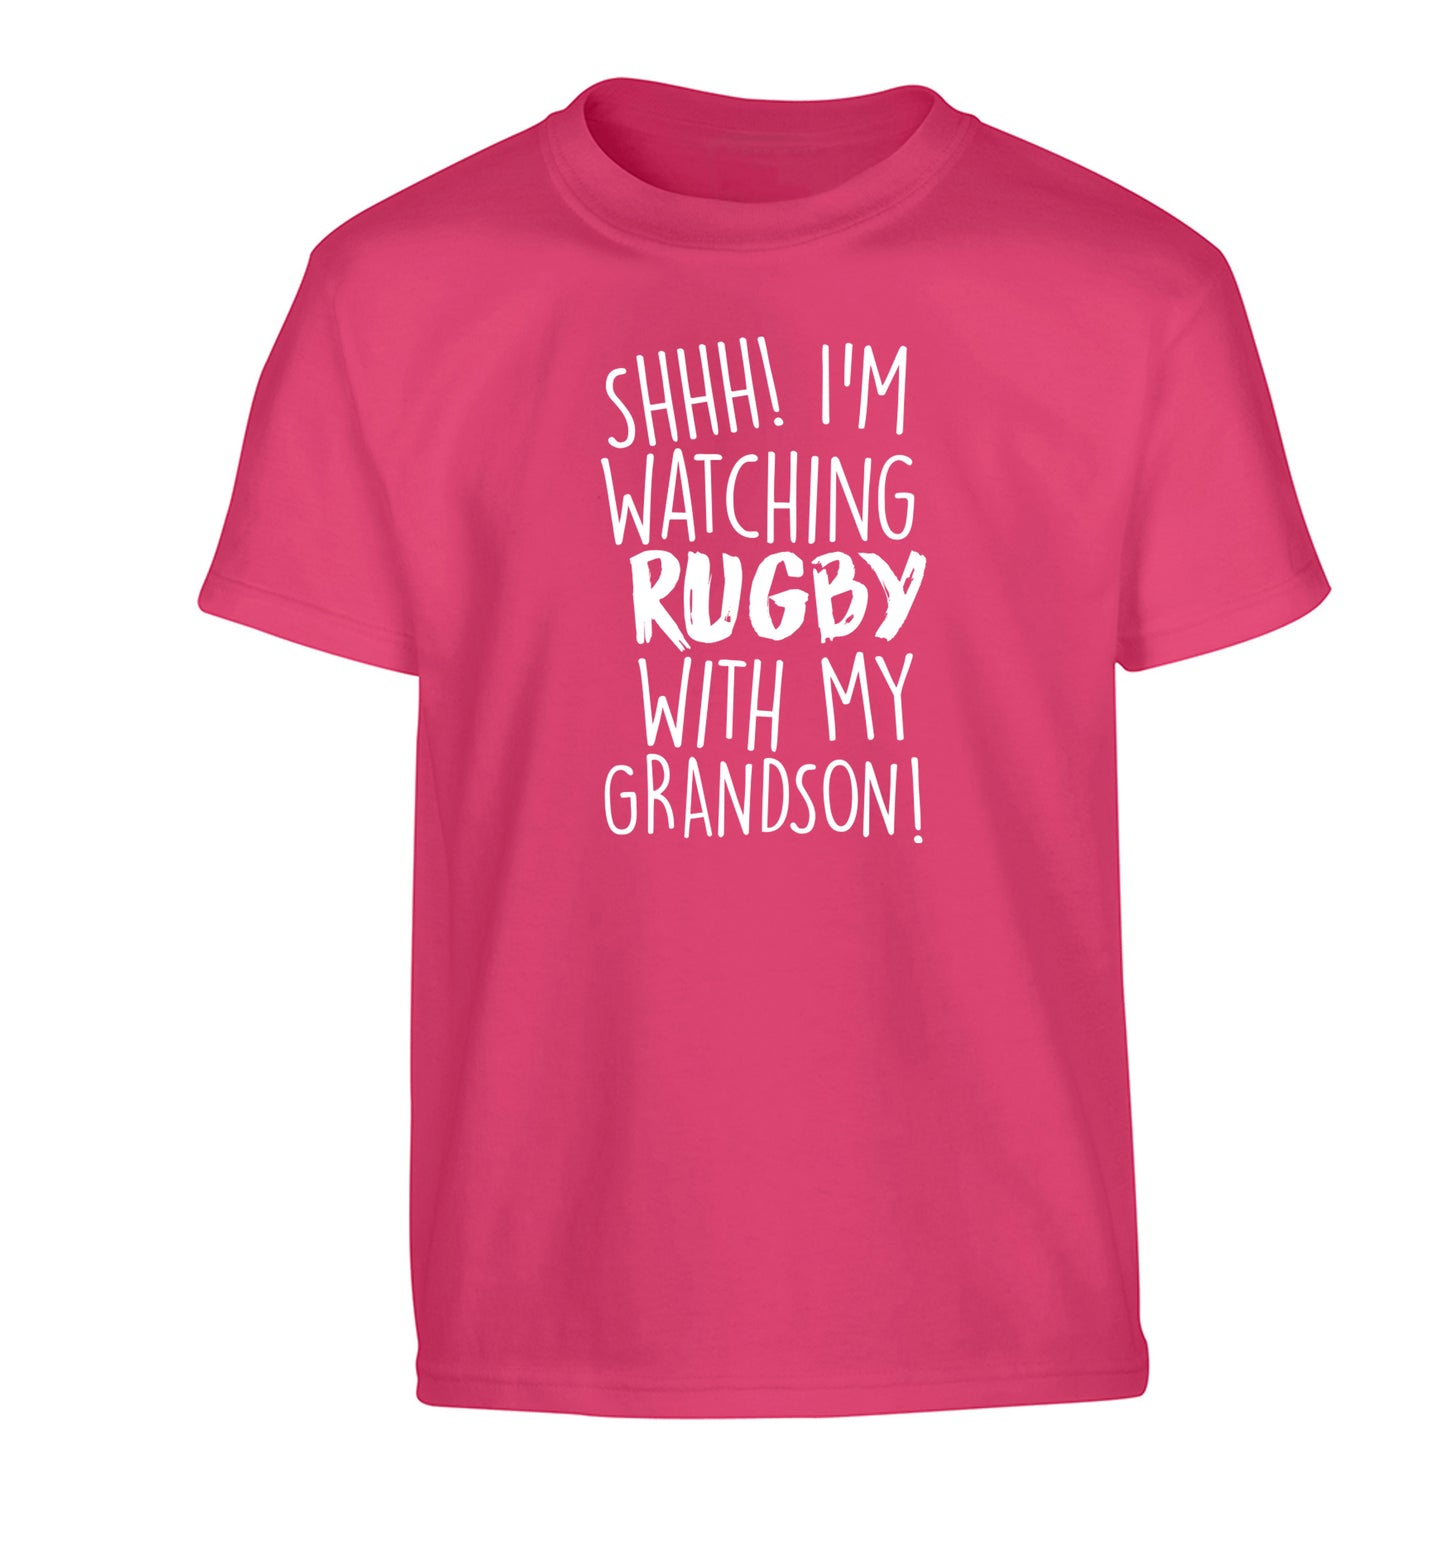 Shh I'm watching rugby with my grandson Children's pink Tshirt 12-13 Years